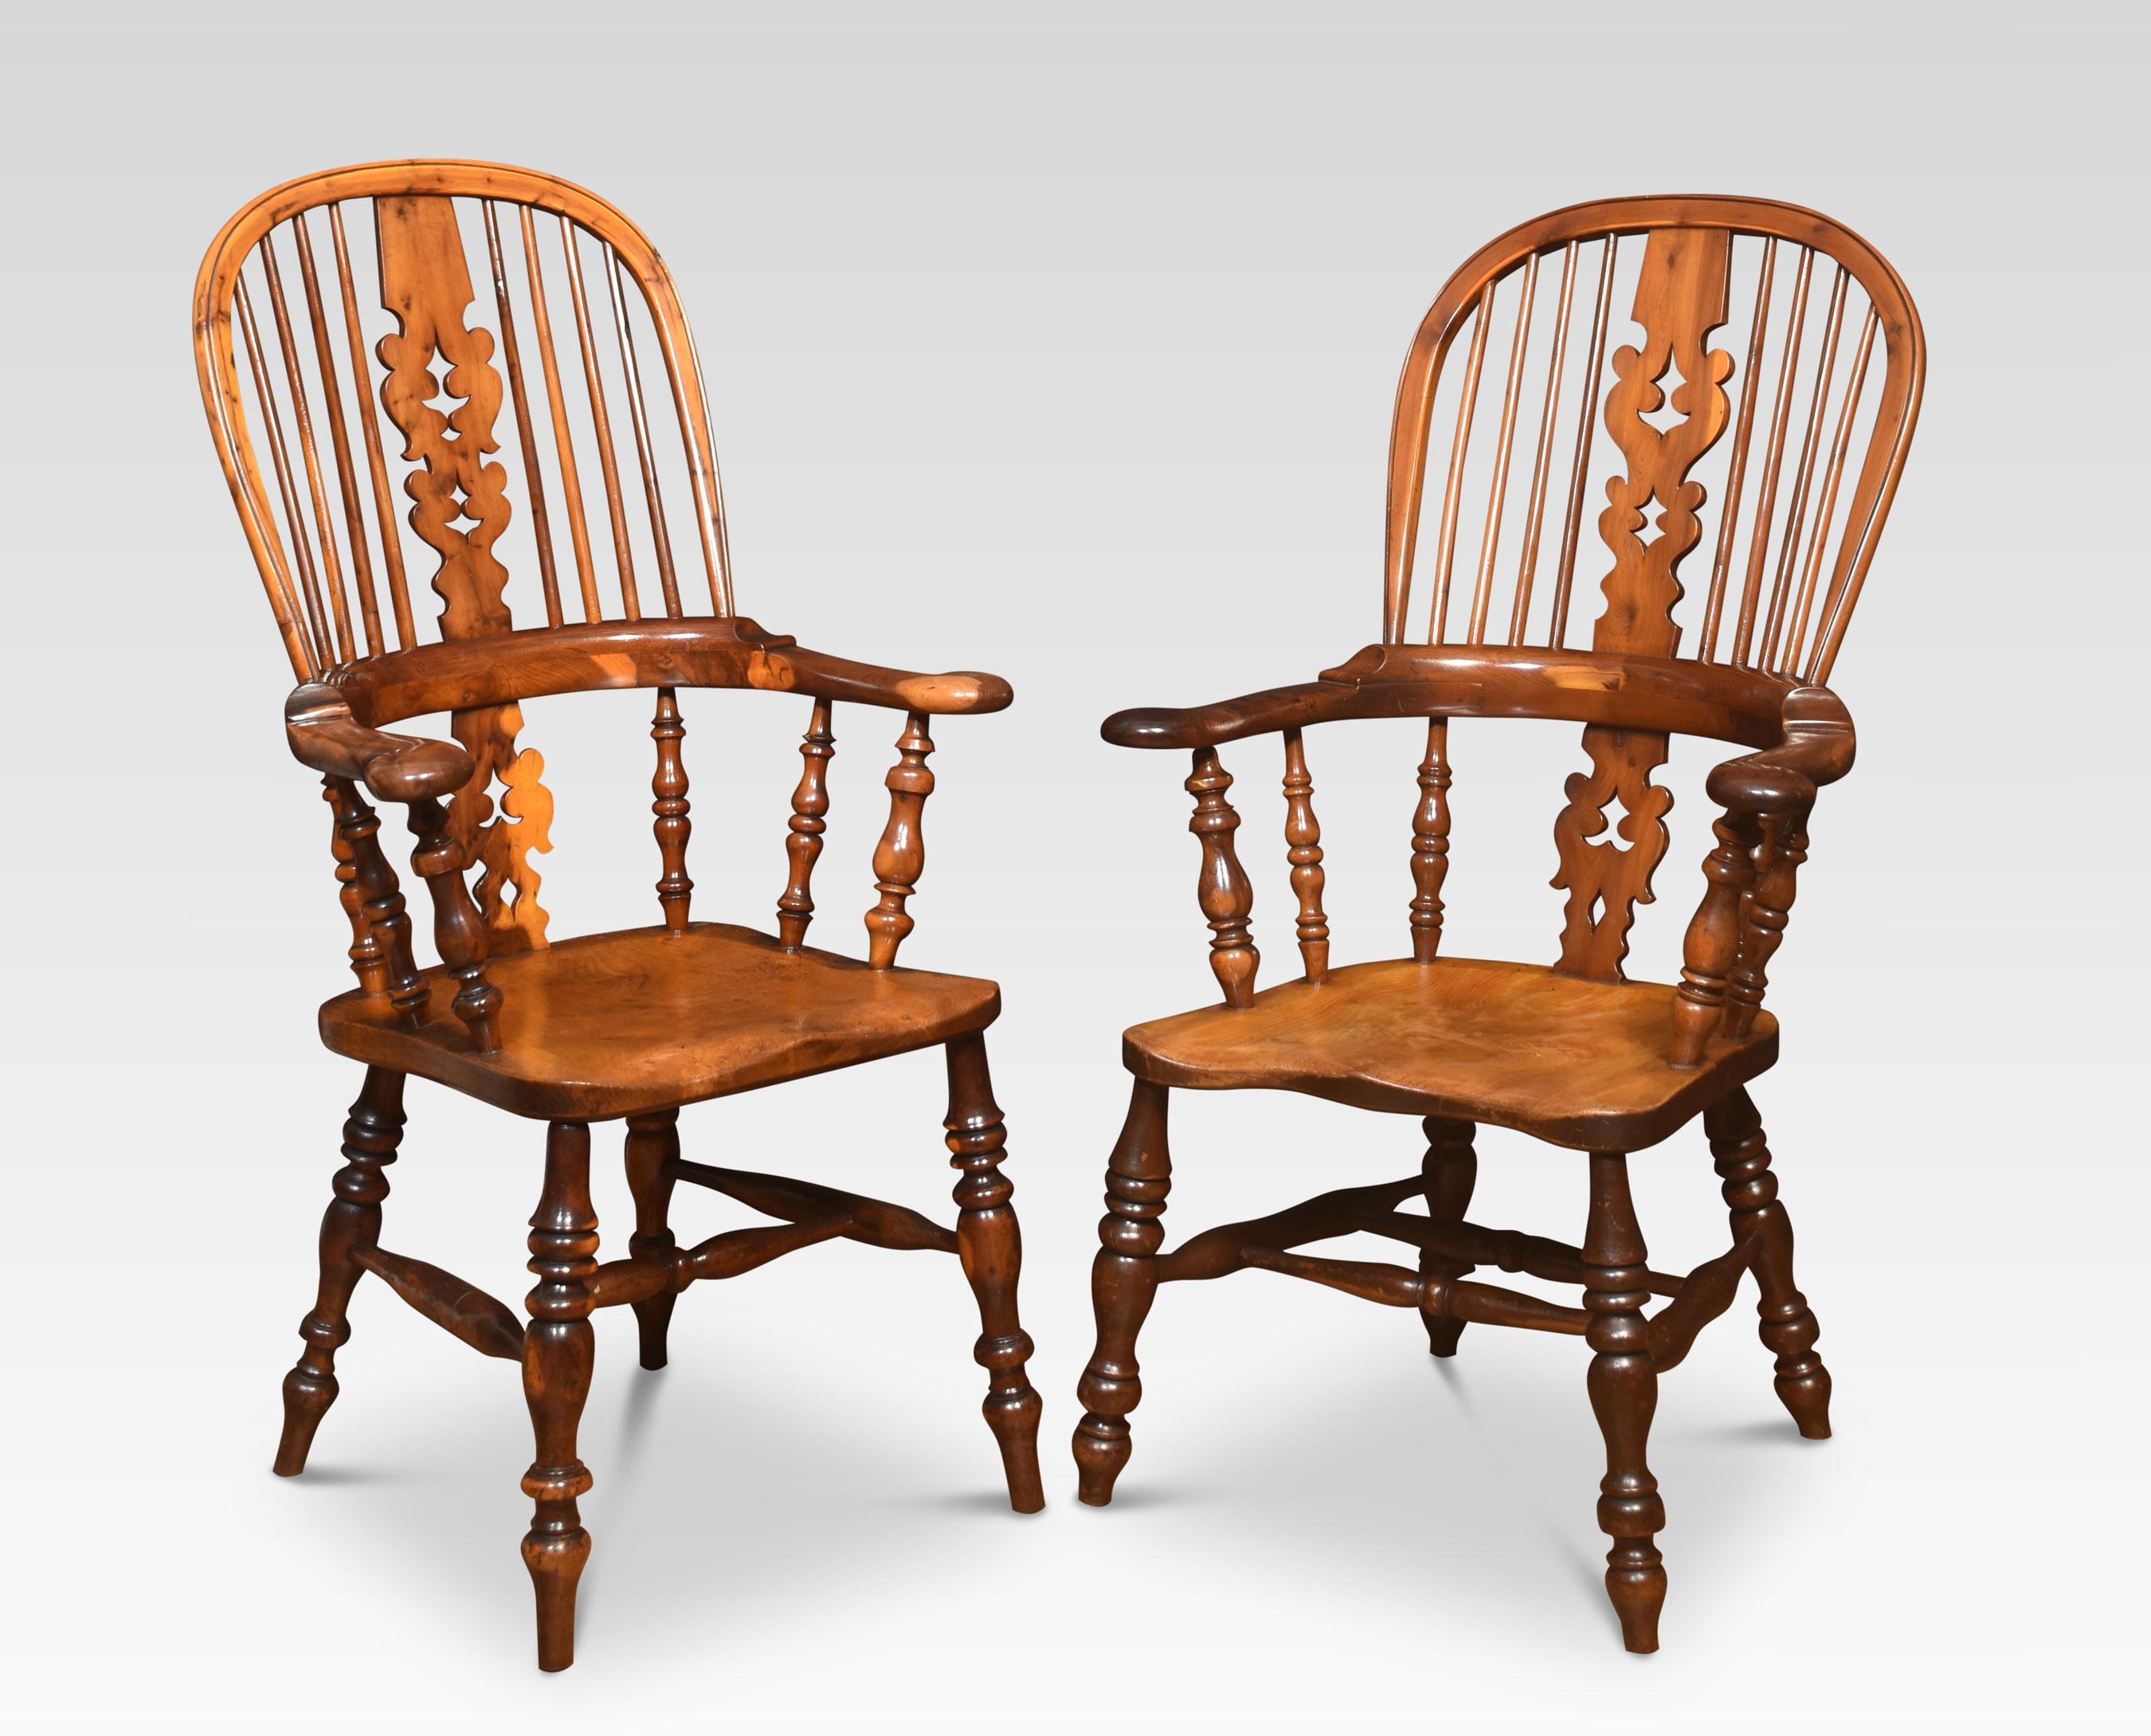 Matched set of six 19th century yew wood broad arm Windsor chairs, the hoop backs with a pierced and shaped central splat above ash and elm seats surrounded by broad arms. Raised up on turned legs united by stretchers.
Dimensions

Tallest